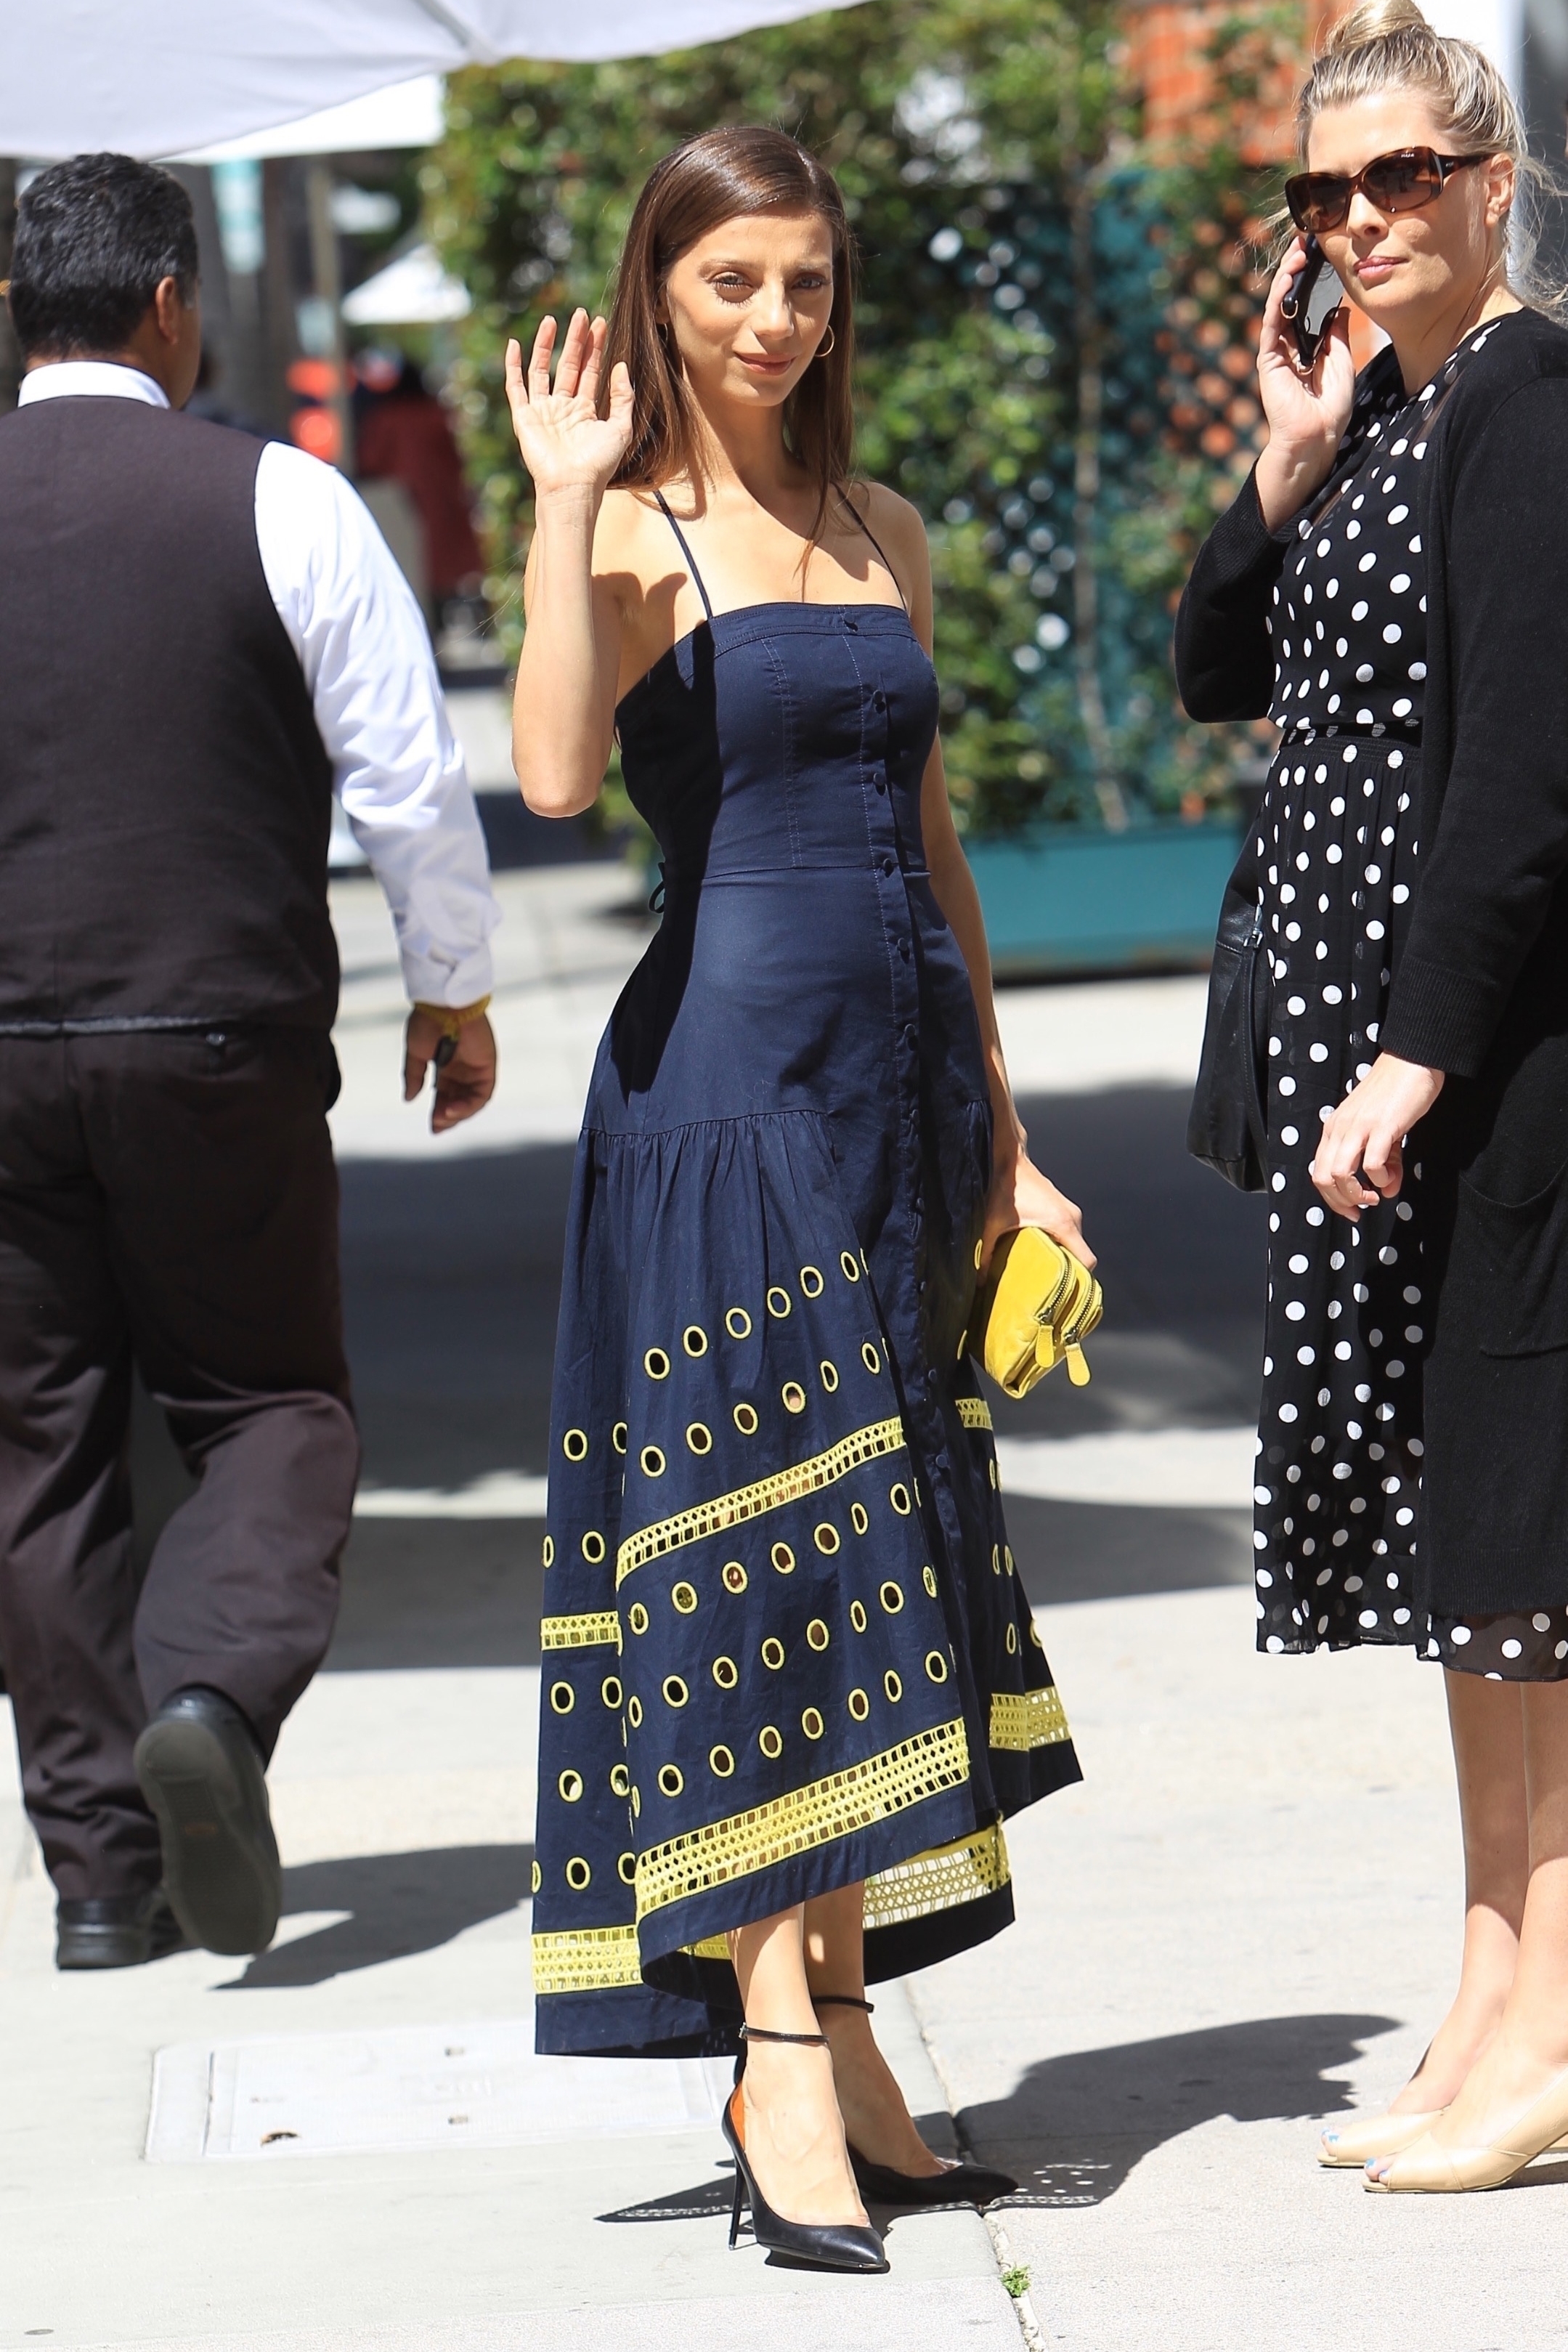 angela-sarafyan-out-for-lunch-in-beverly-hills-32718-1.jpg